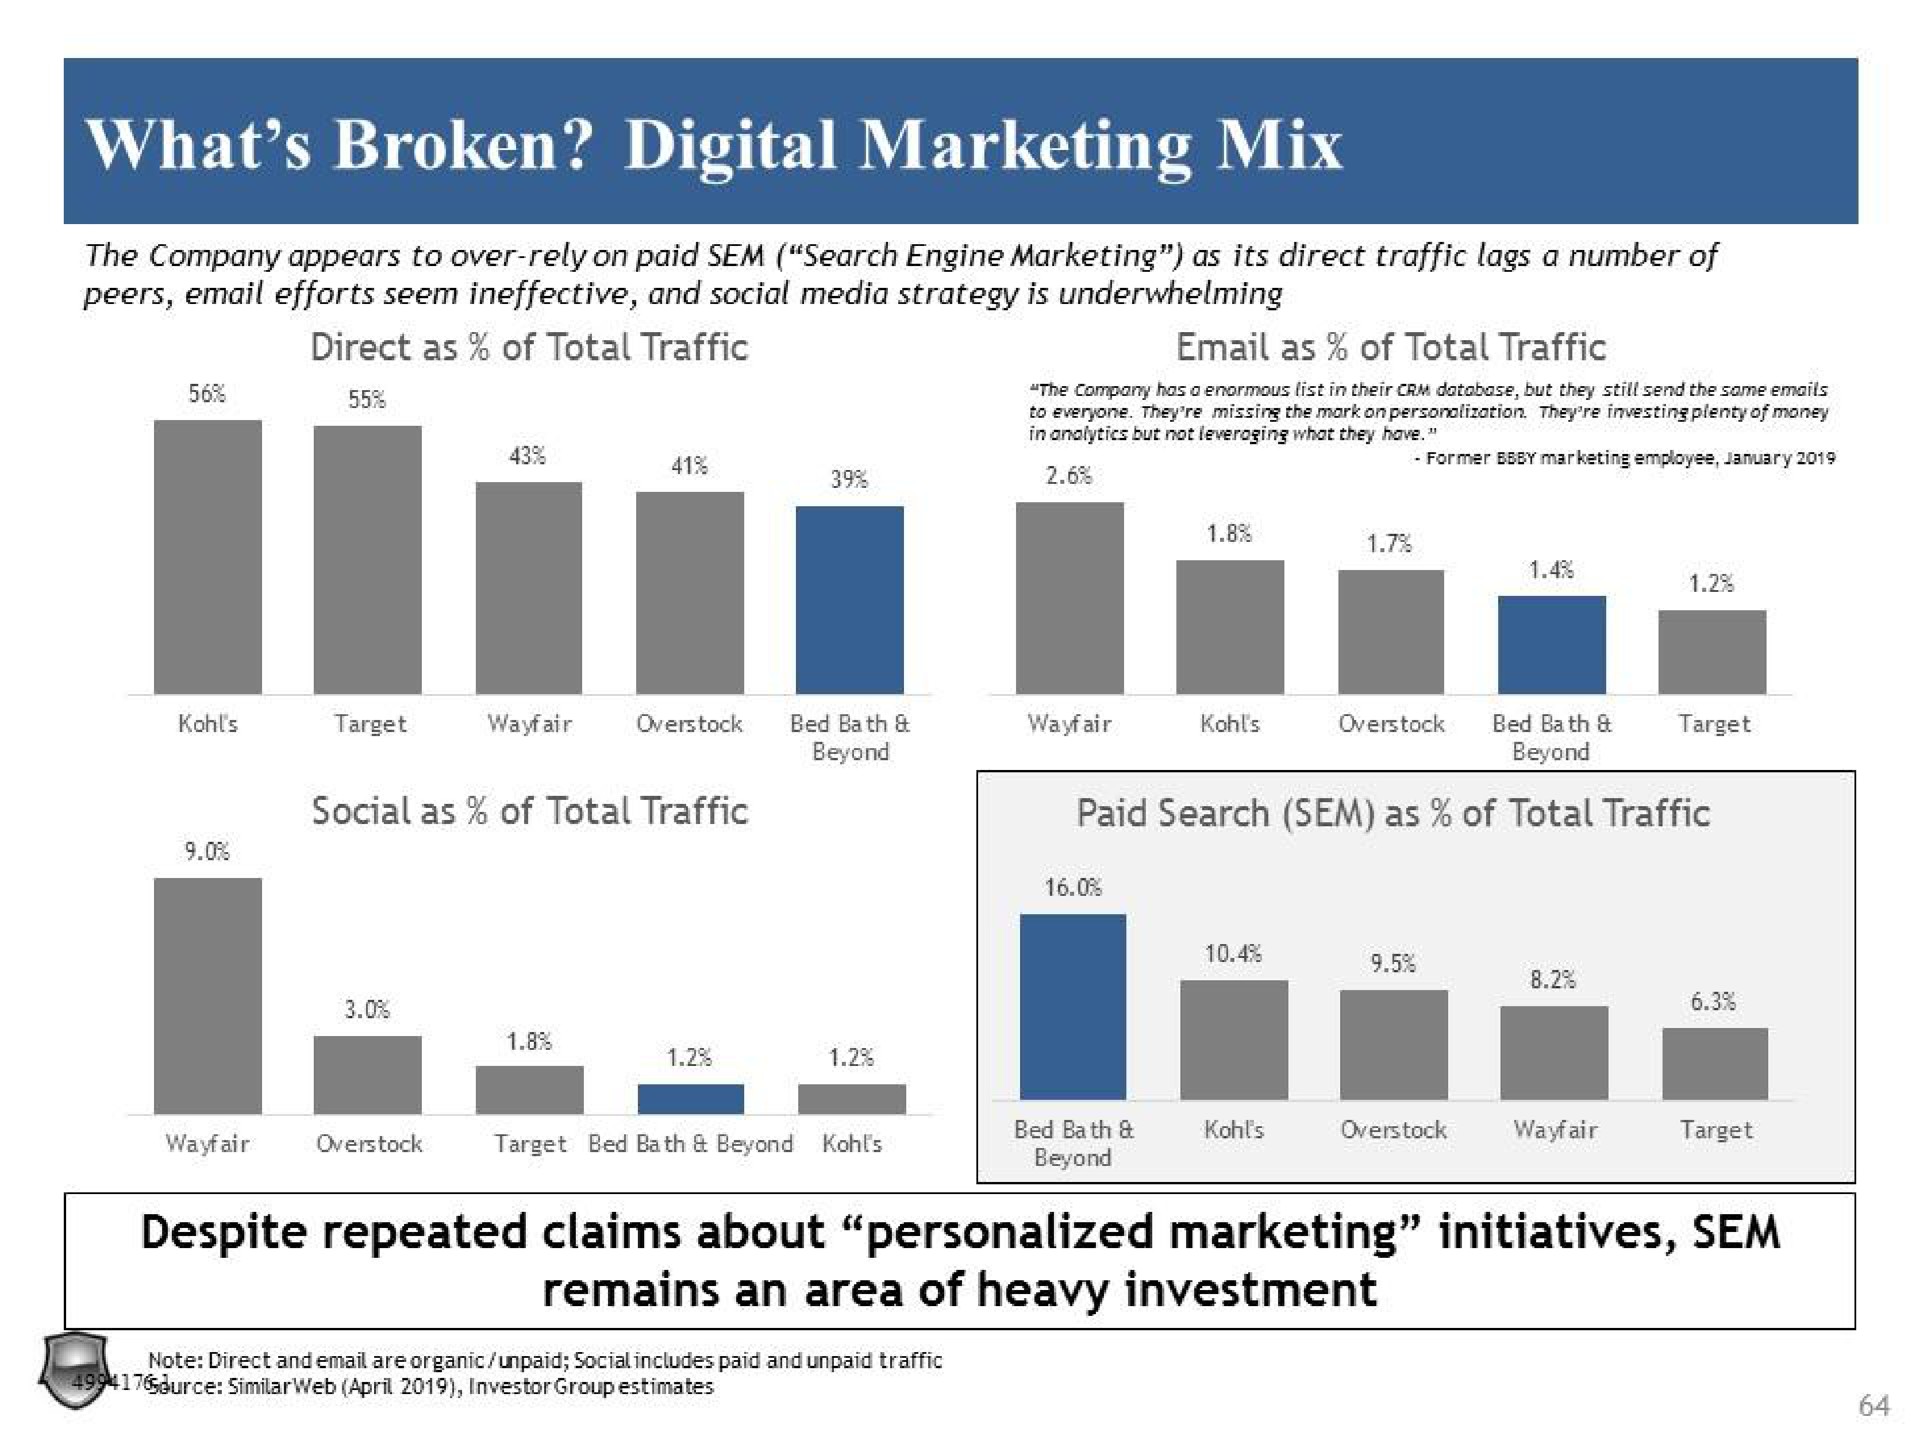 what broken digital marketing mix despite repeated claims about personalized marketing initiatives remains an area of heavy investment | Legion Partners